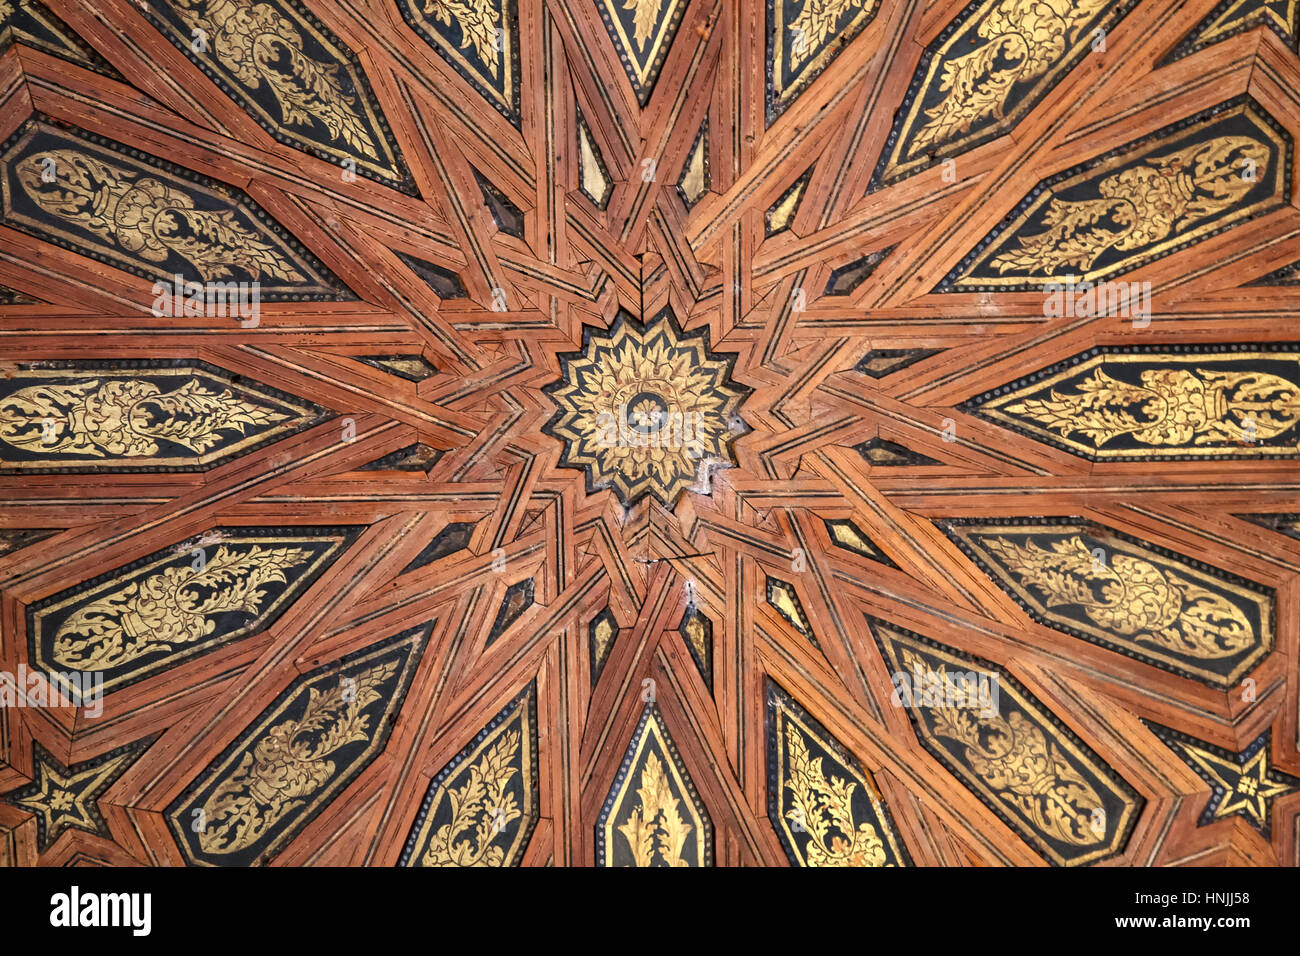 Intricate ceiling, Nasrid Palaces, The Alhambra, Granada, Spain Stock Photo